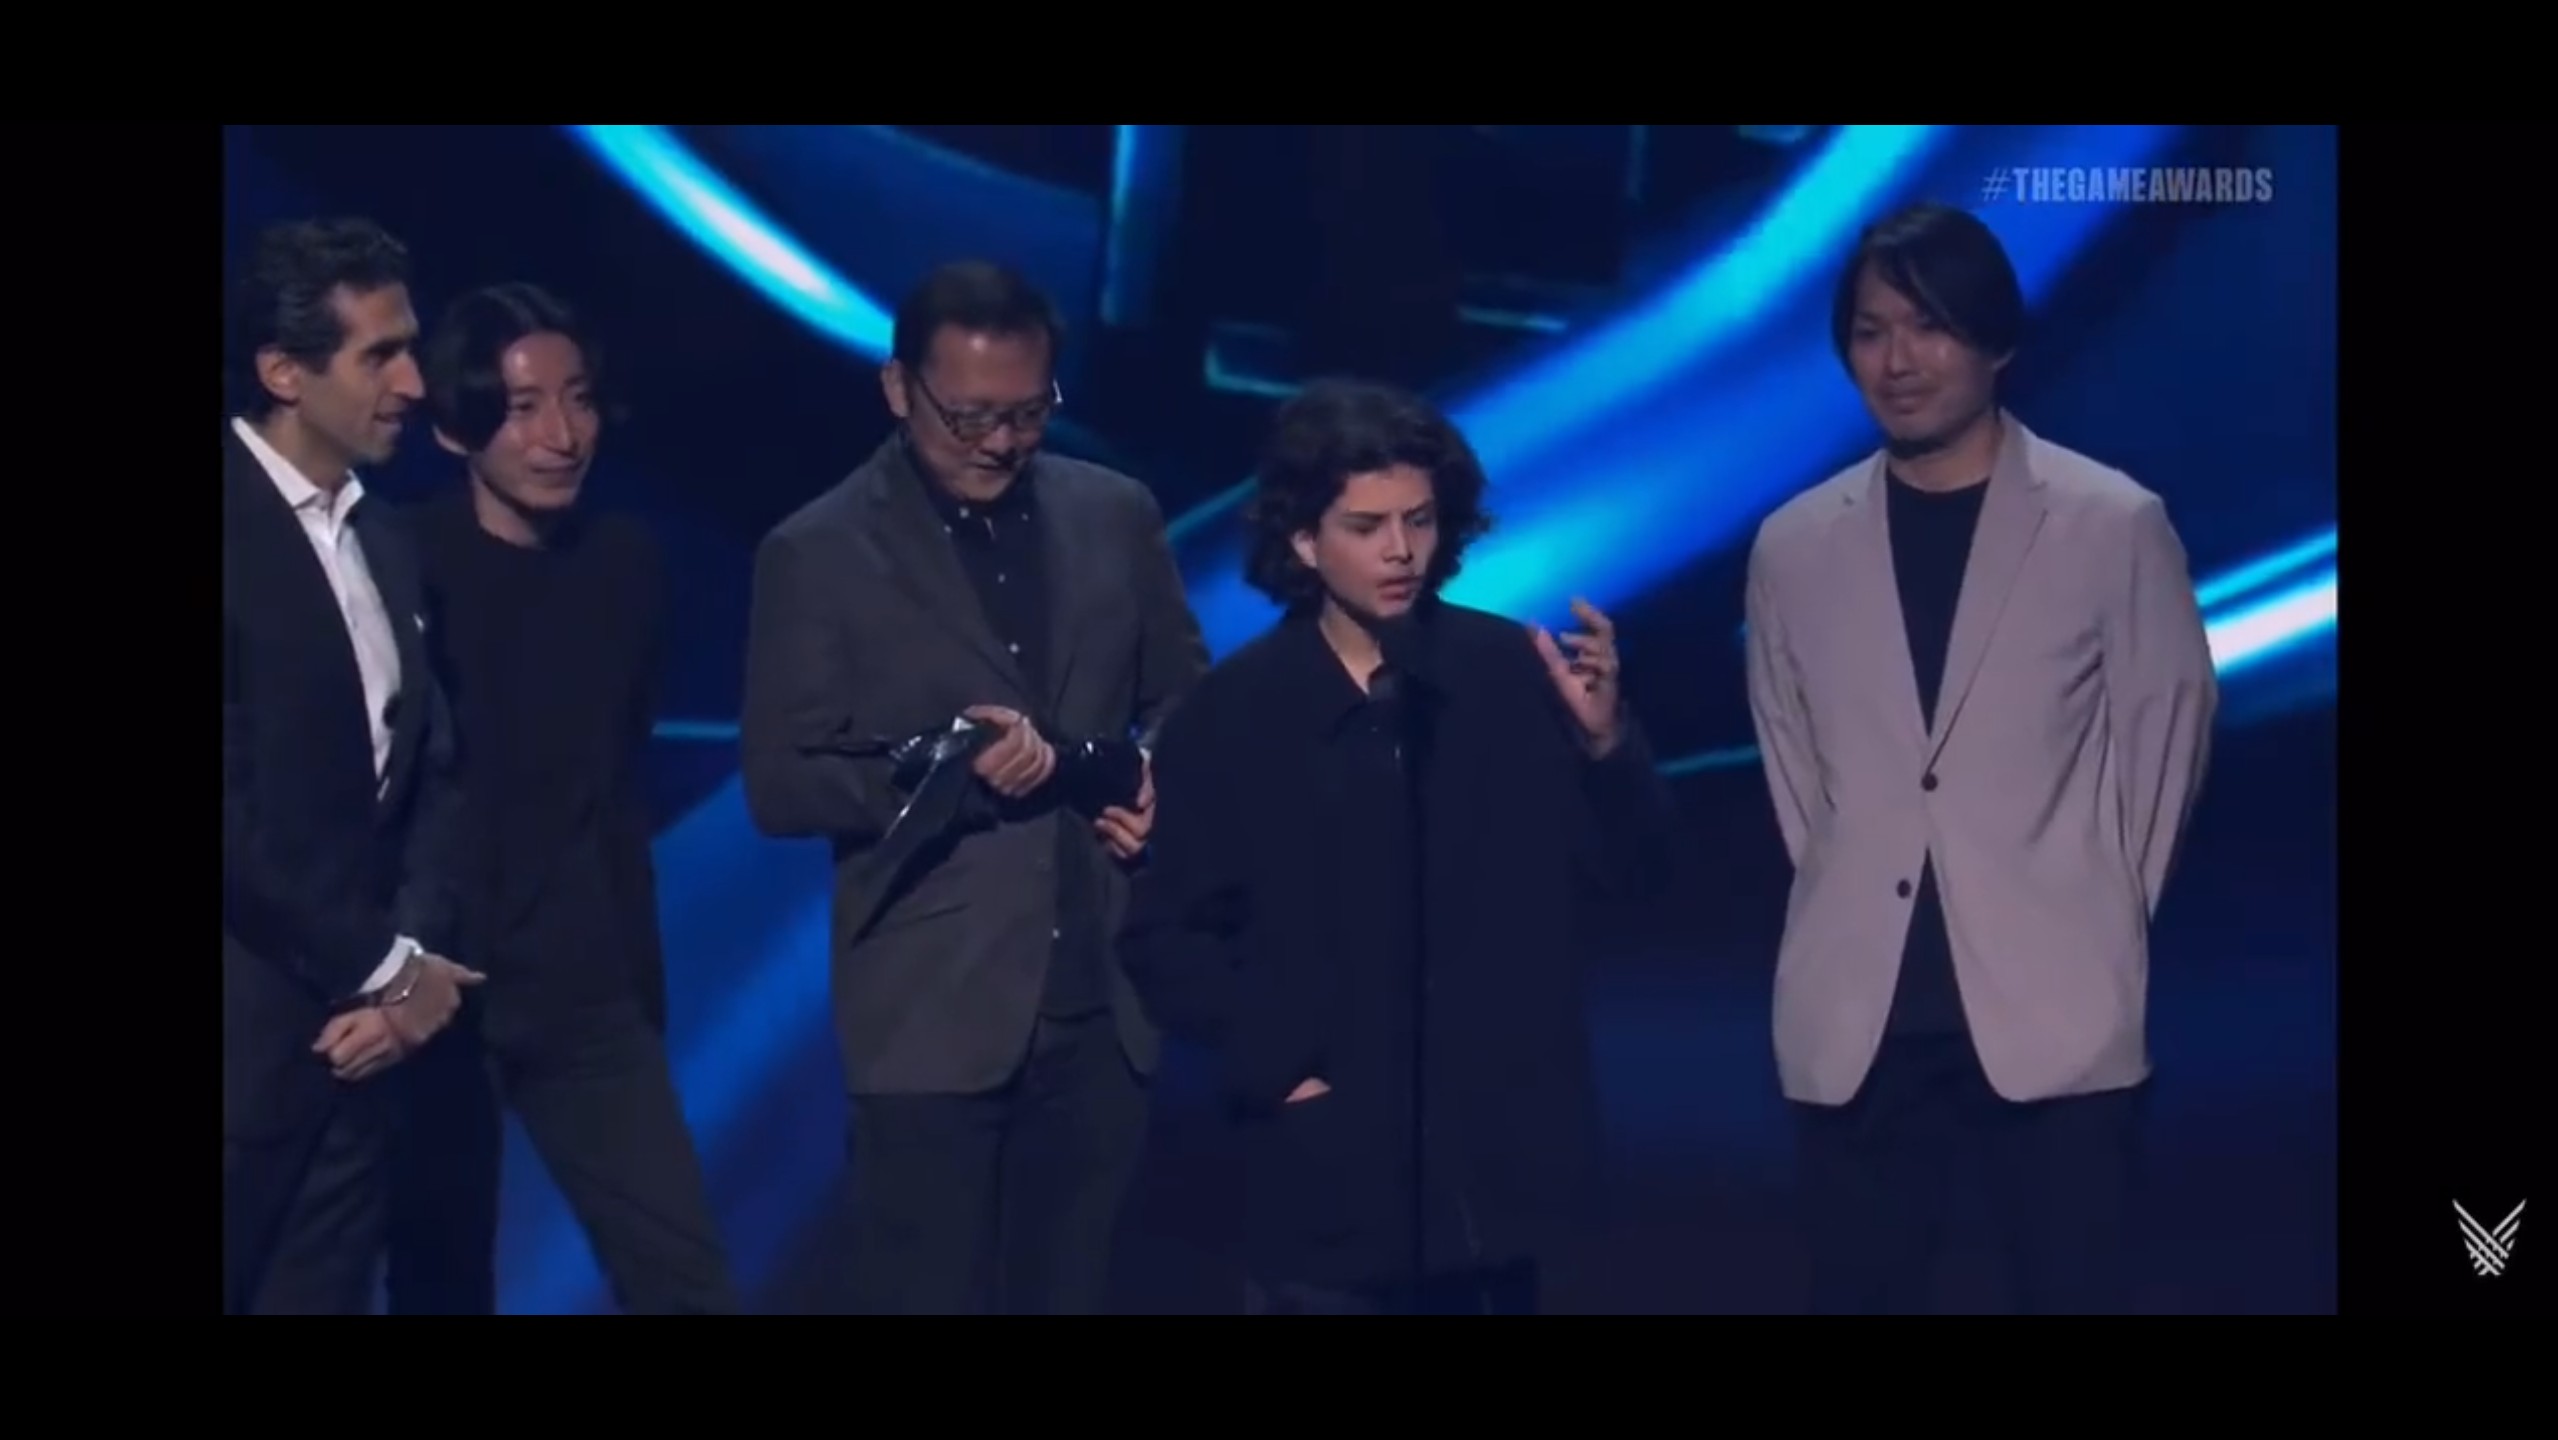 Who Was the Kid That Crashed the Game Awards, and What Did He Say?